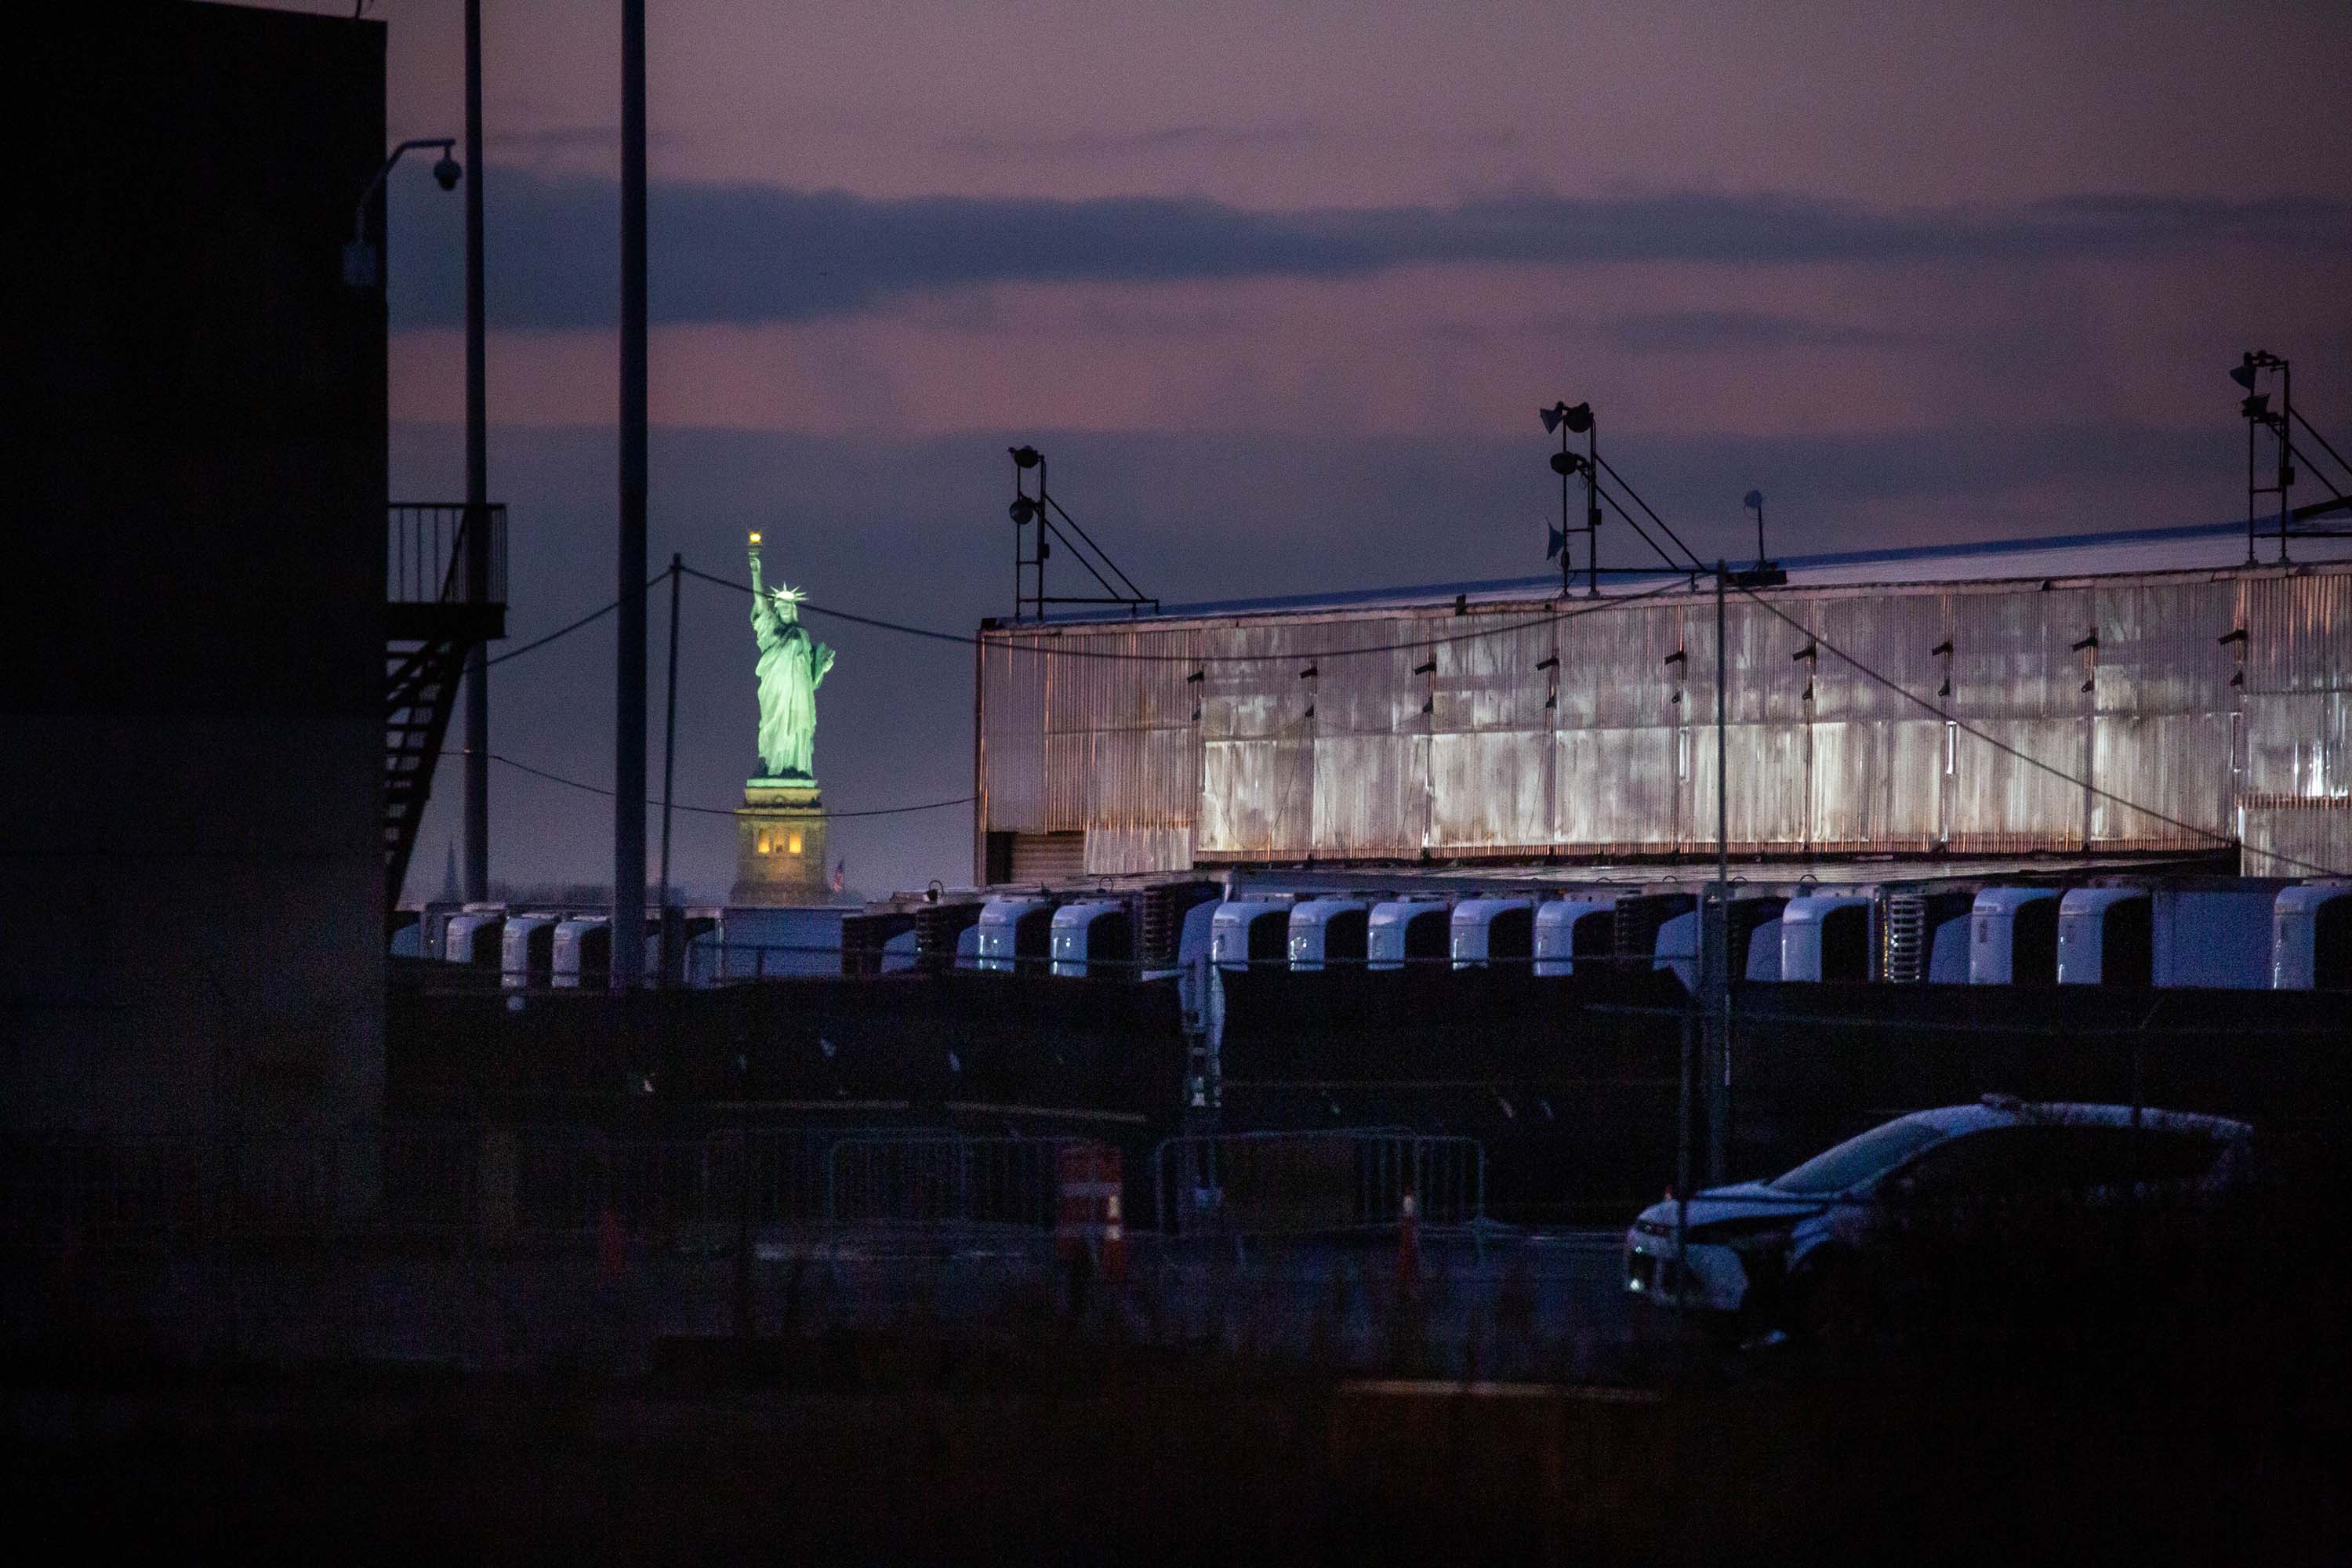 A Covid-19 disaster morgue made up of refrigerated trailers is pictured at the South Brooklyn Marine Terminal in New York, on December 14.